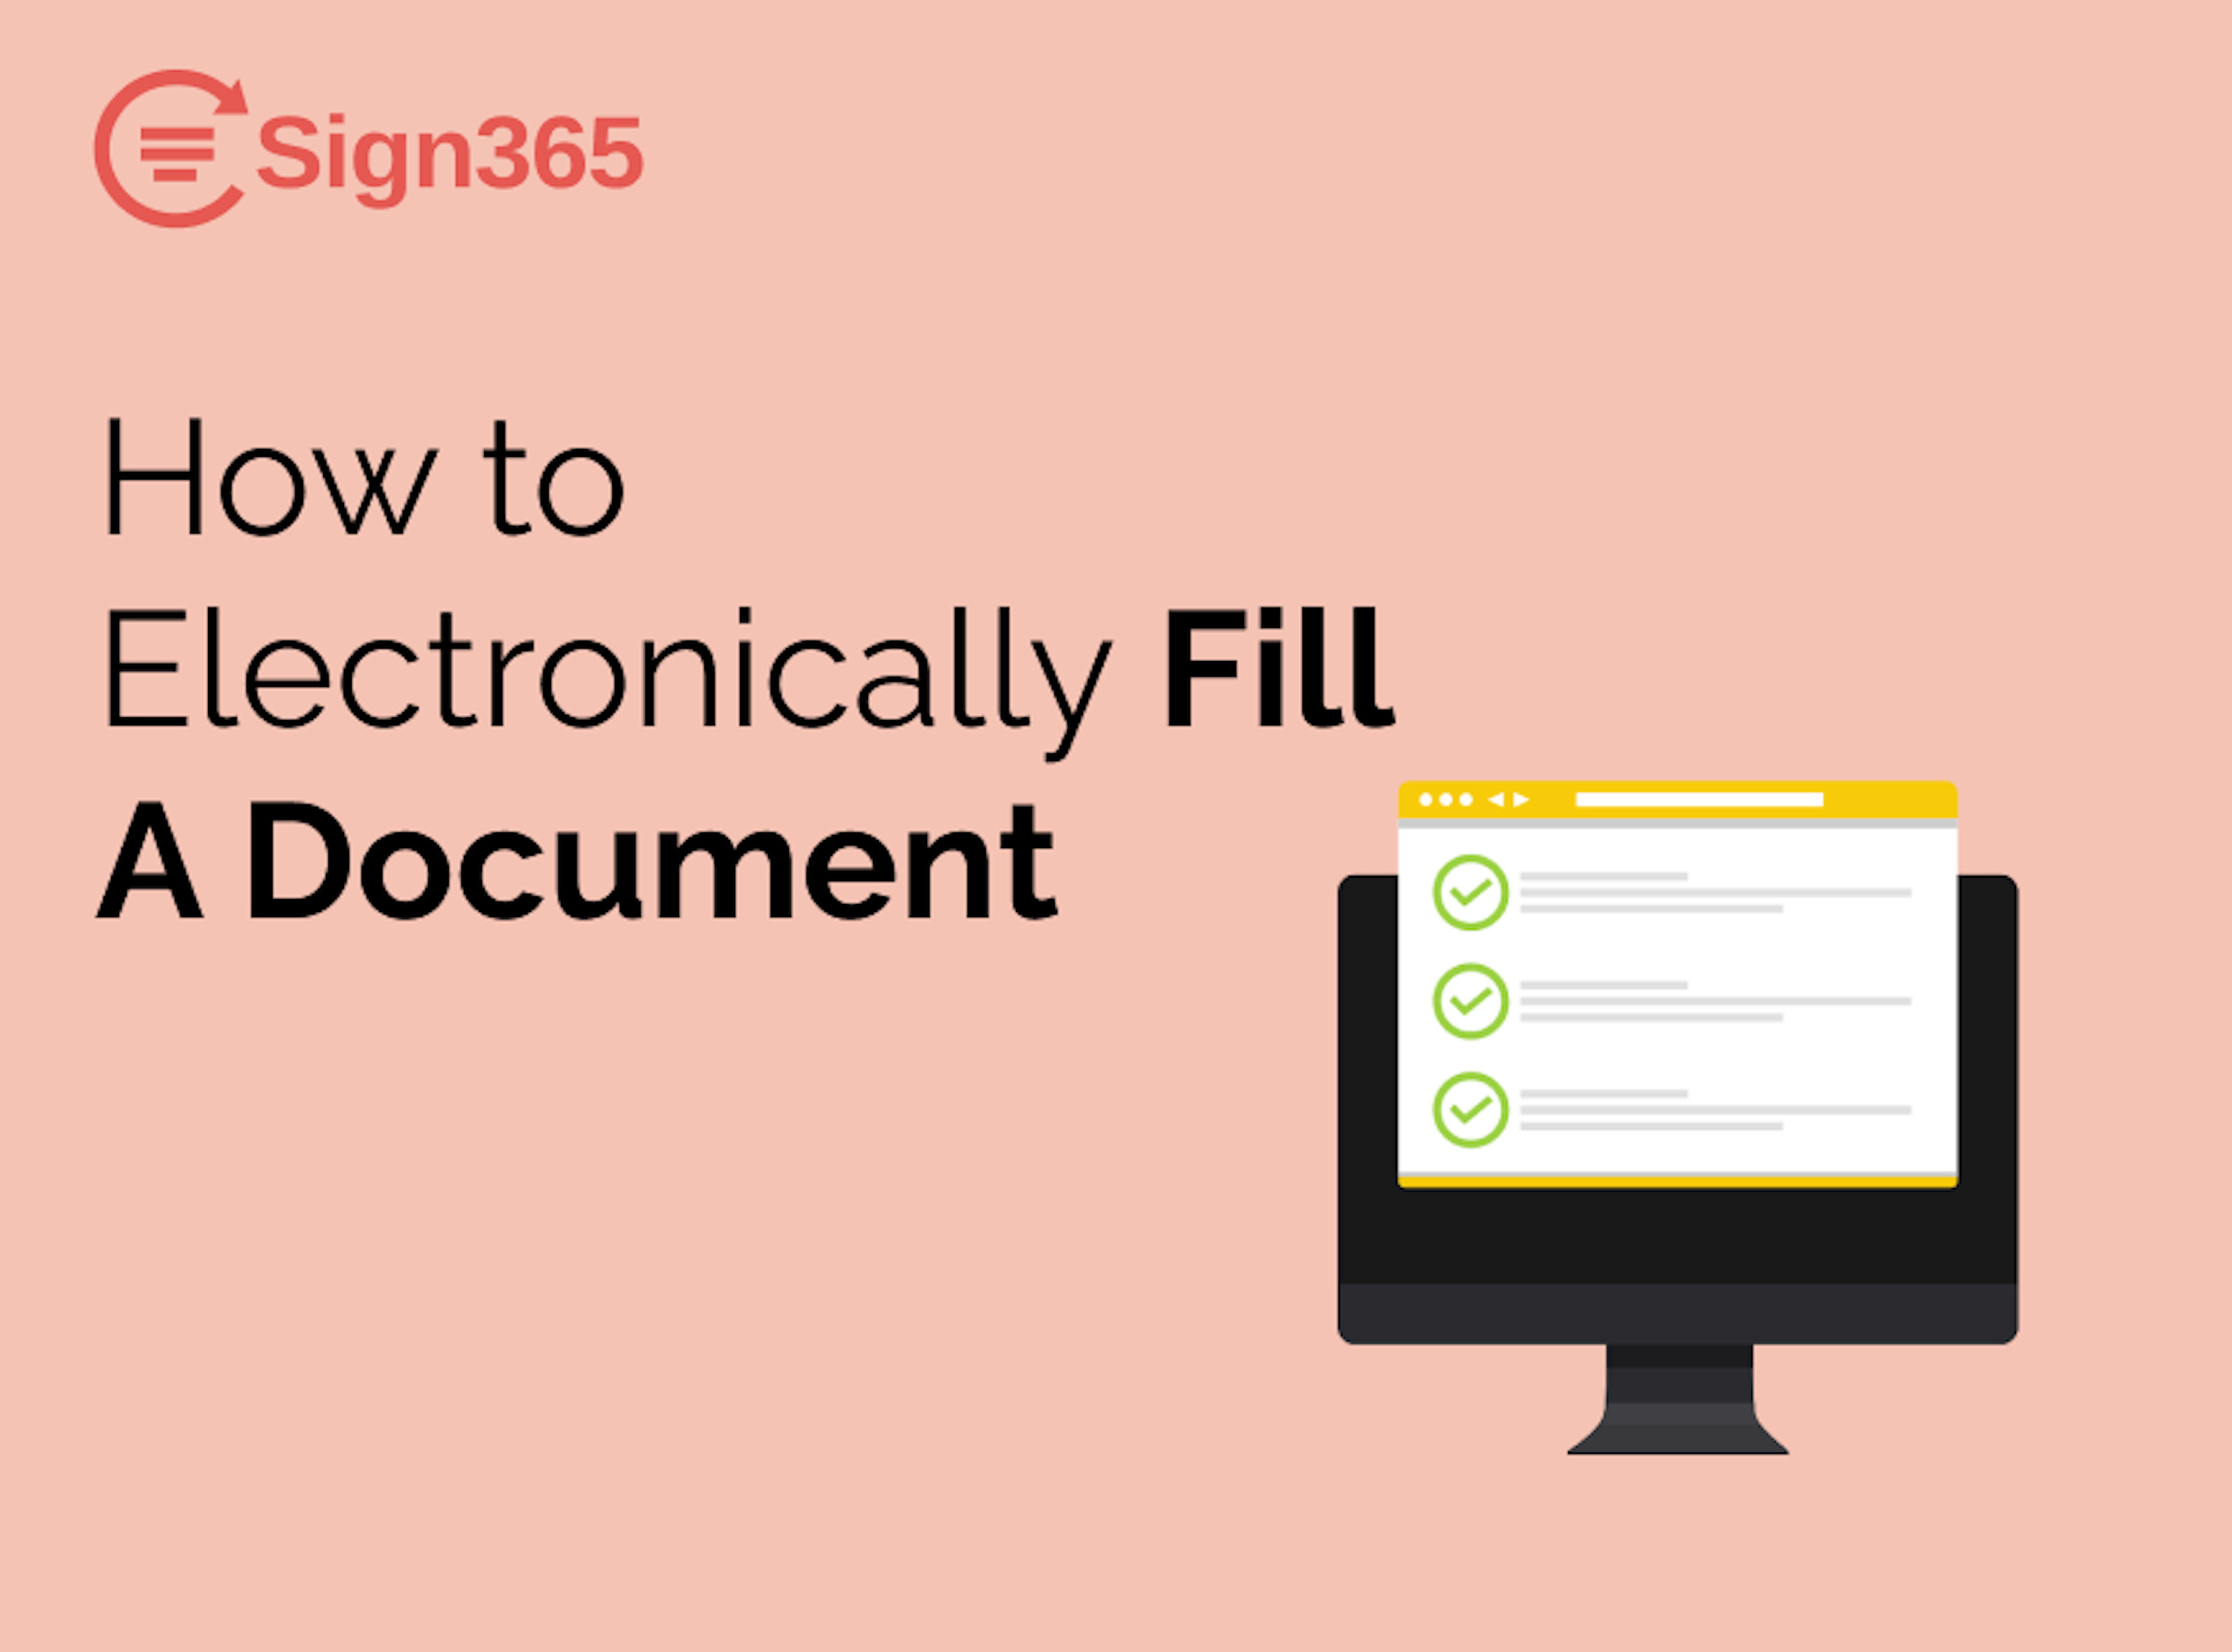 How to Electronically Fill A Document